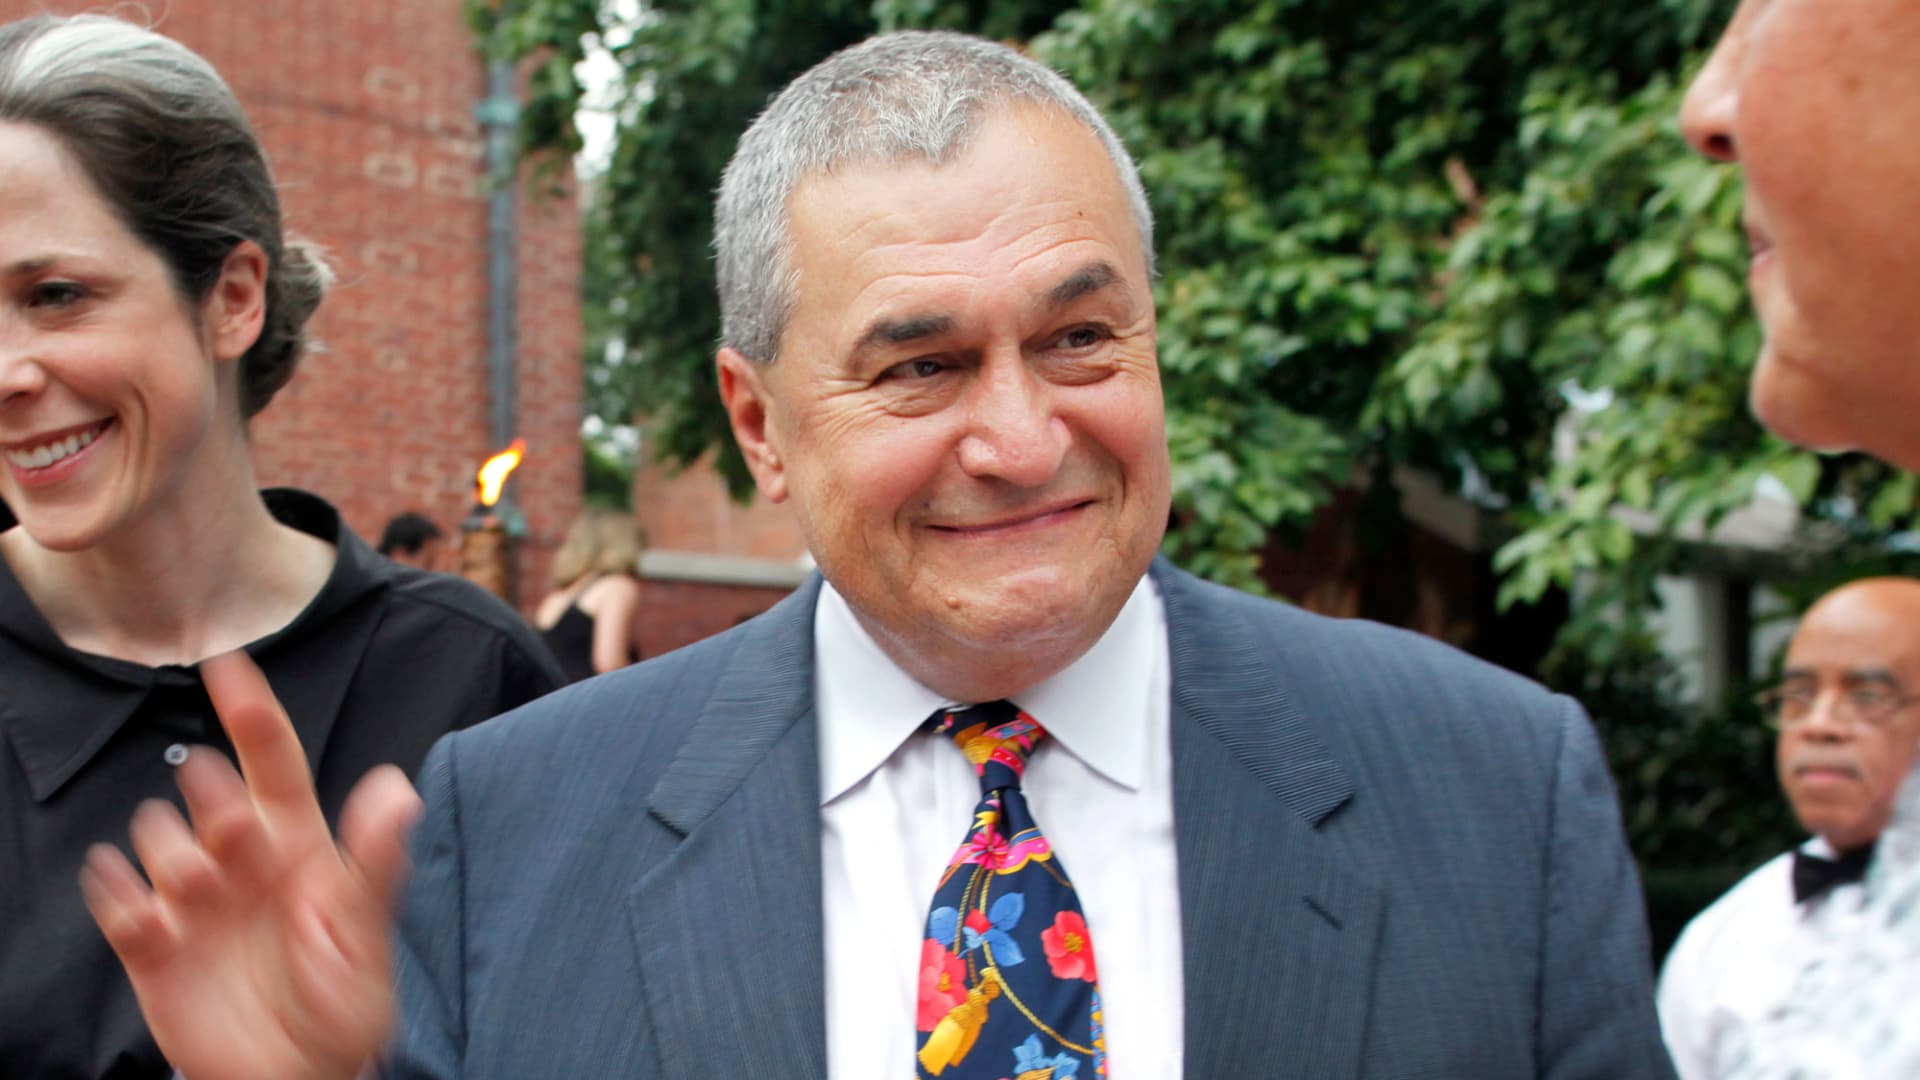 Federal prosecutors said to be investigating lobbyist Tony Podesta after special counsel referral